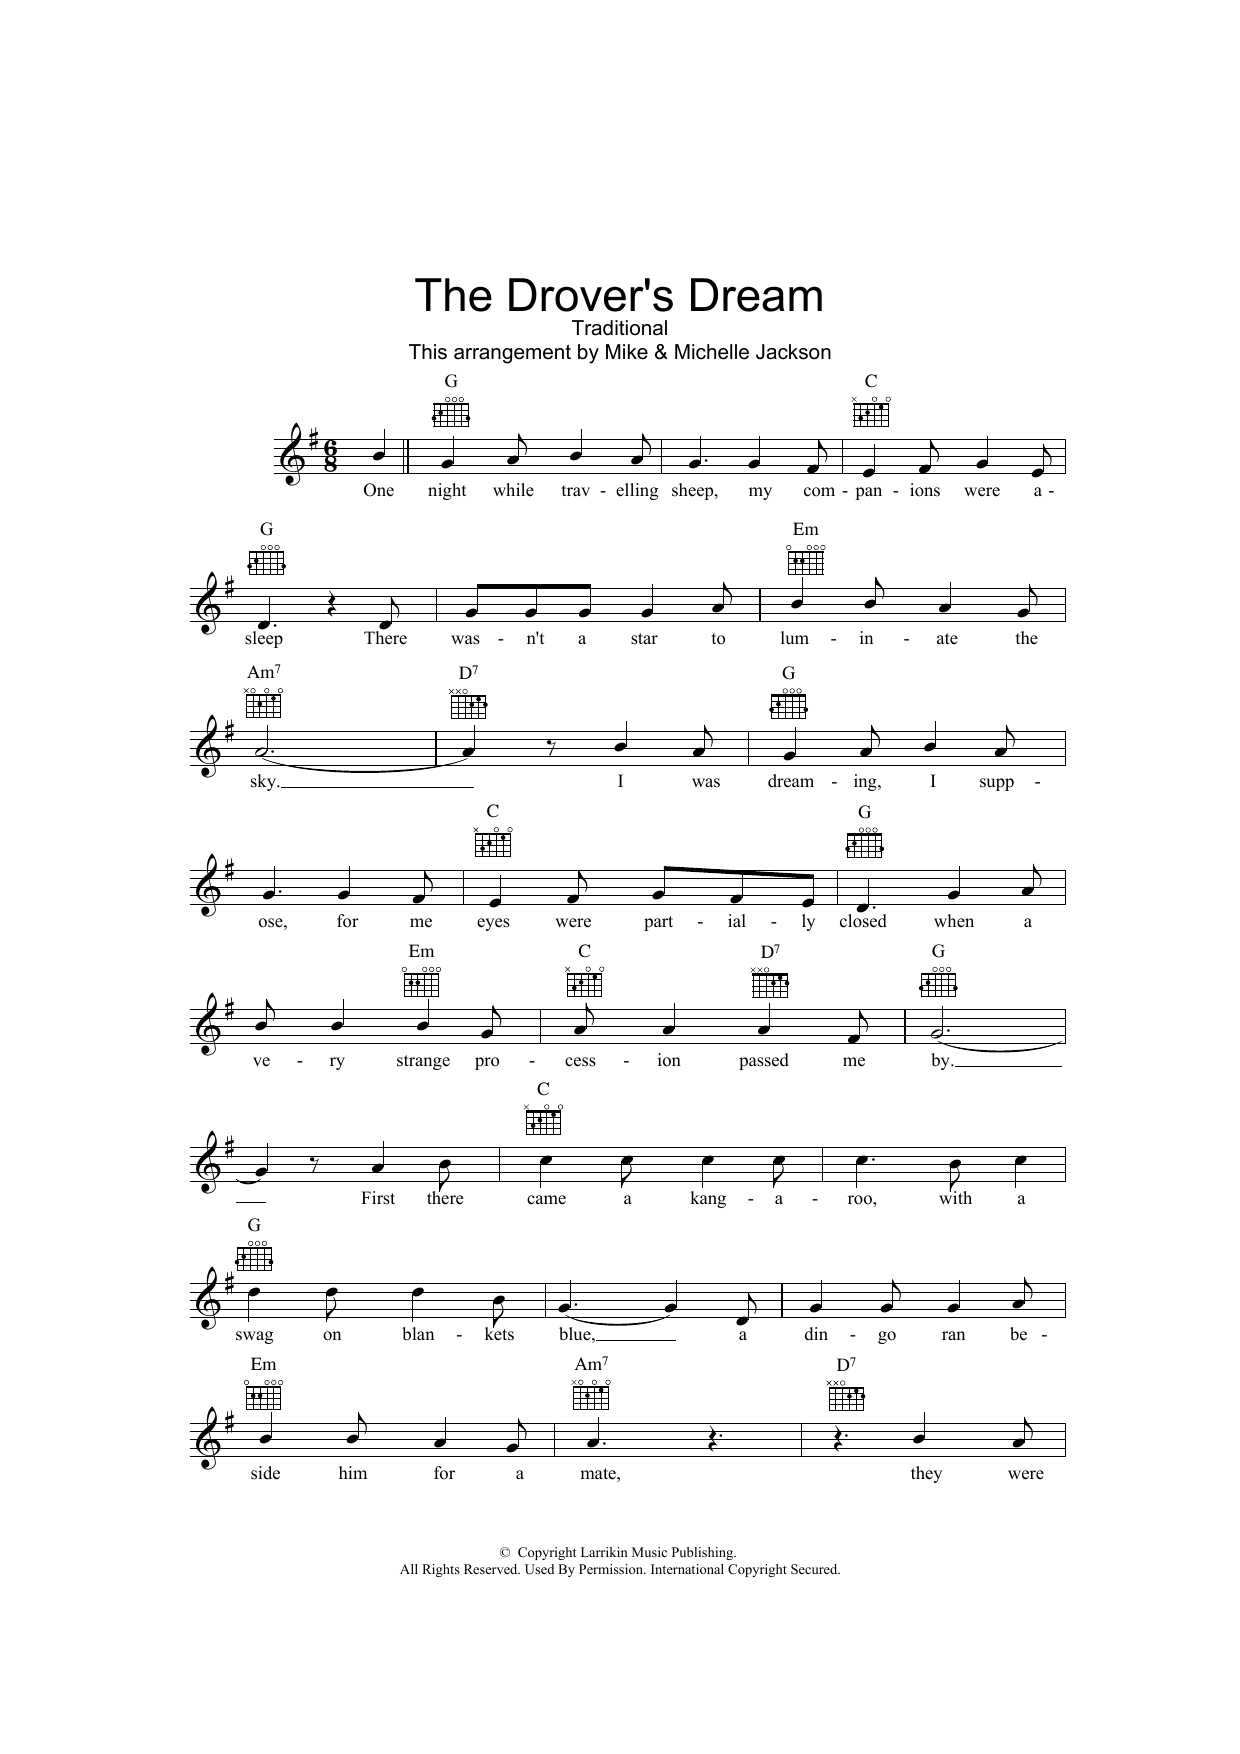 Download Traditional The Drover's Dream Sheet Music